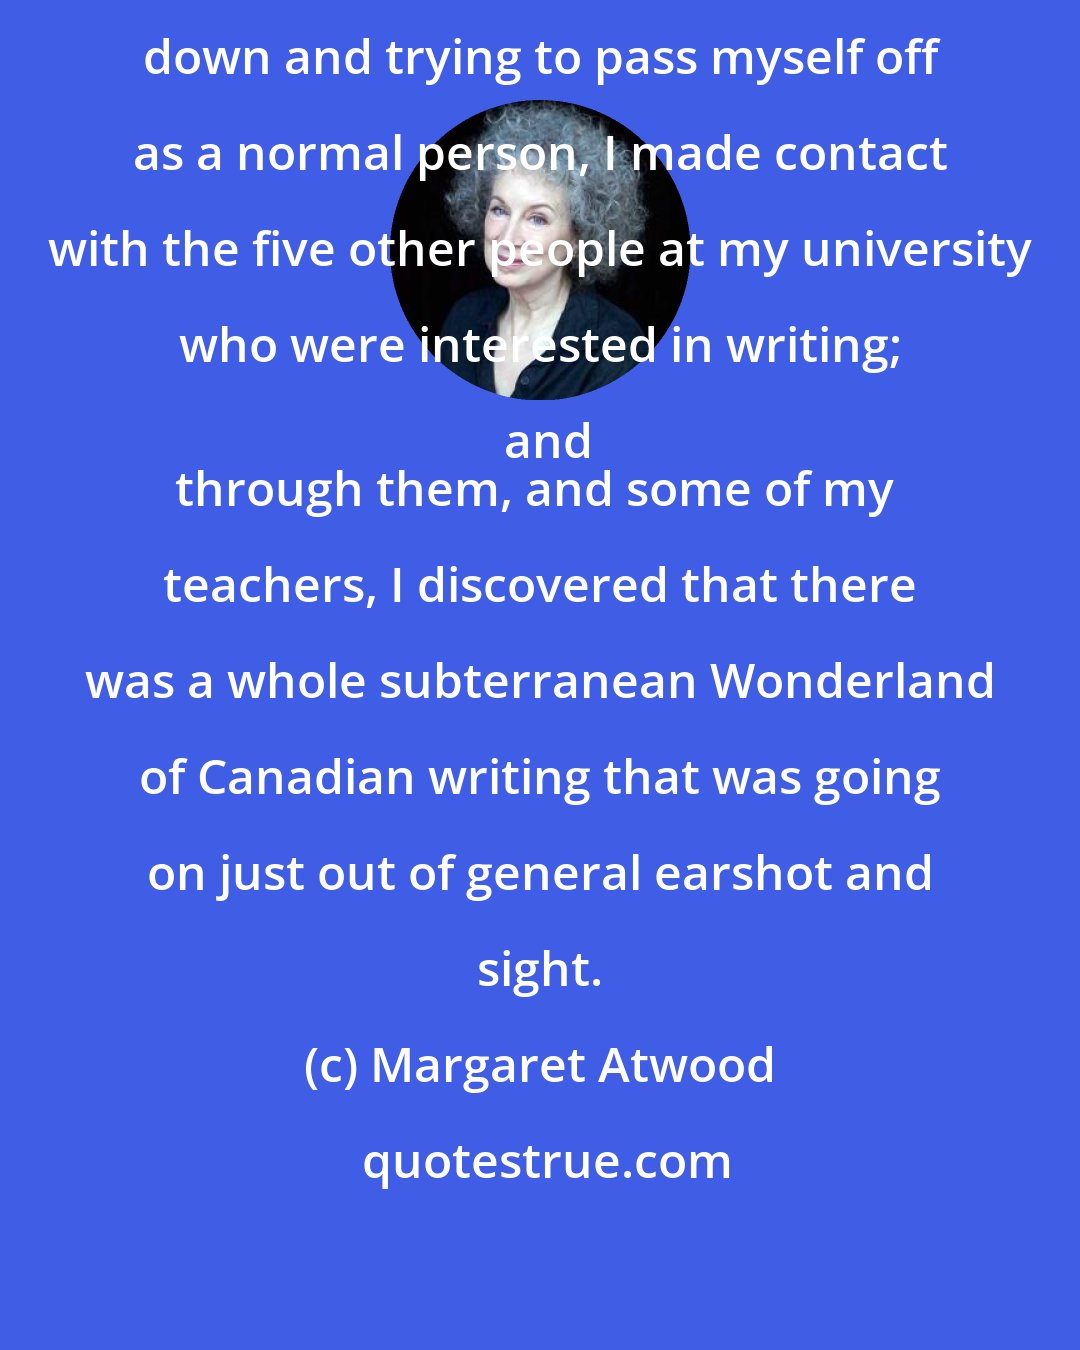 Margaret Atwood: After a year or two of keeping my head down and trying to pass myself off as a normal person, I made contact with the five other people at my university who were interested in writing; and
through them, and some of my teachers, I discovered that there was a whole subterranean Wonderland of Canadian writing that was going on just out of general earshot and sight.